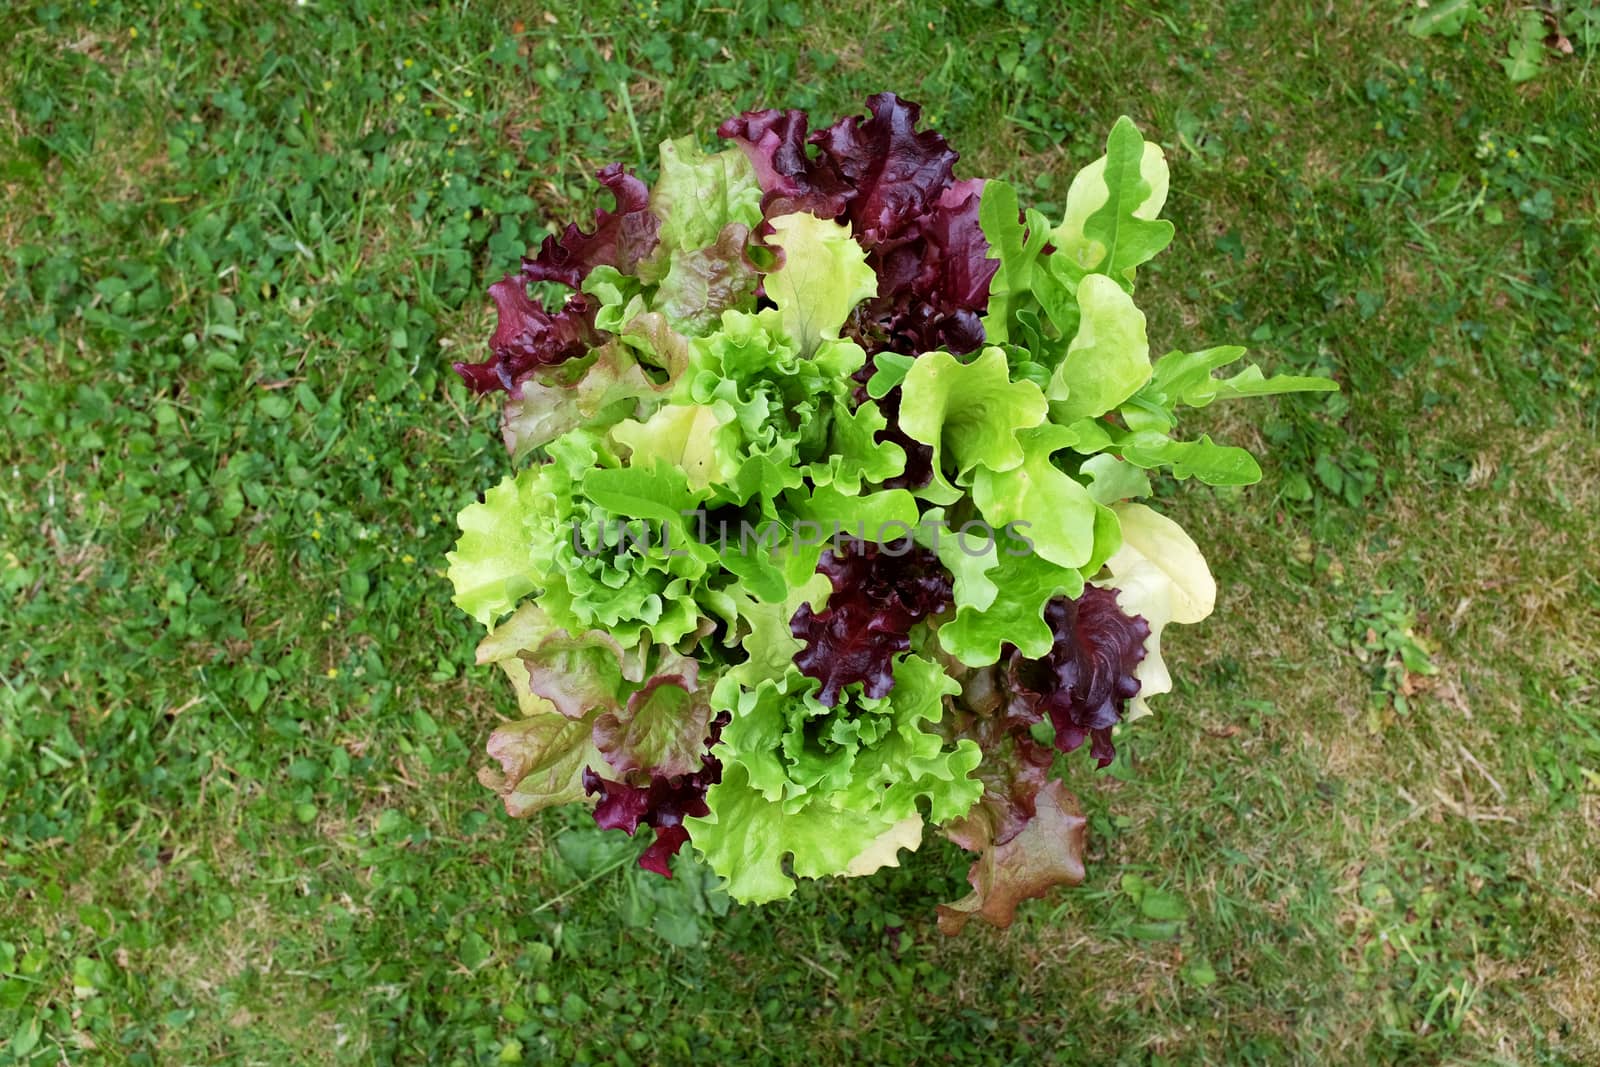 Fresh mixed lettuce plants with red and green salad leaves seen from above on a grass lawn